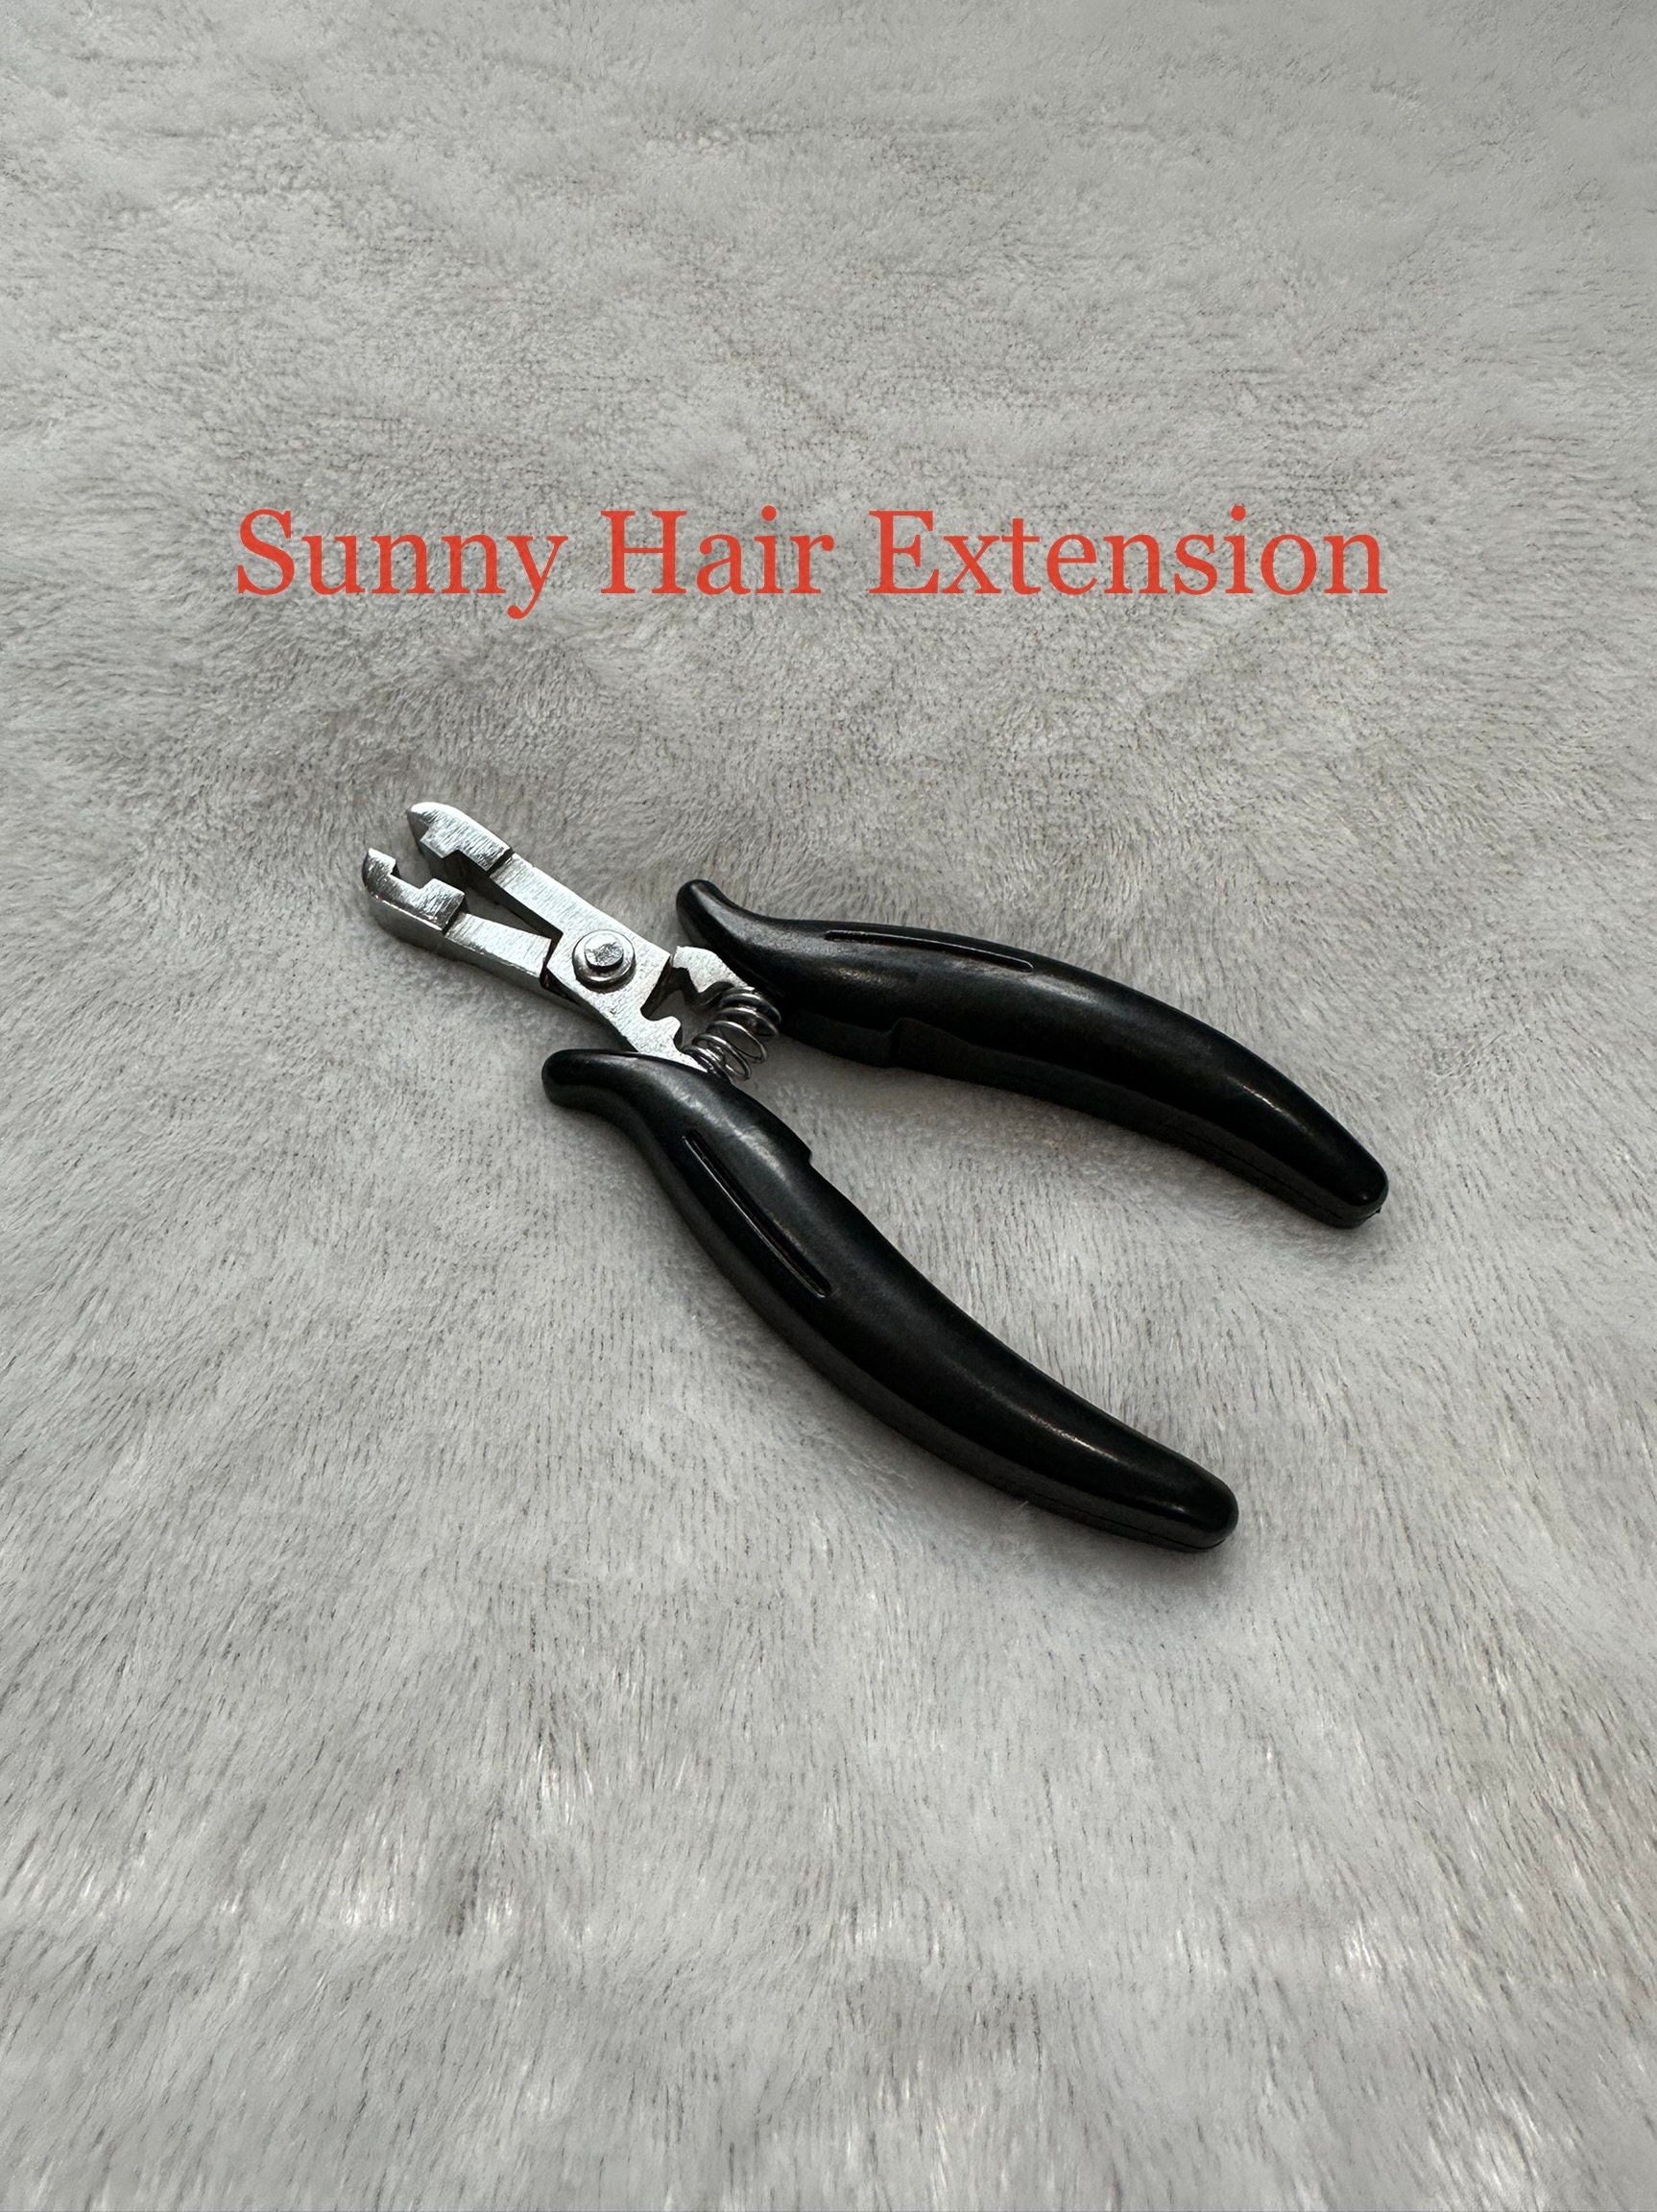 7 inch Long Pro Hair Extension Pliers Micro Link/Bead Closer Tool Kit Plier Beading, Silver